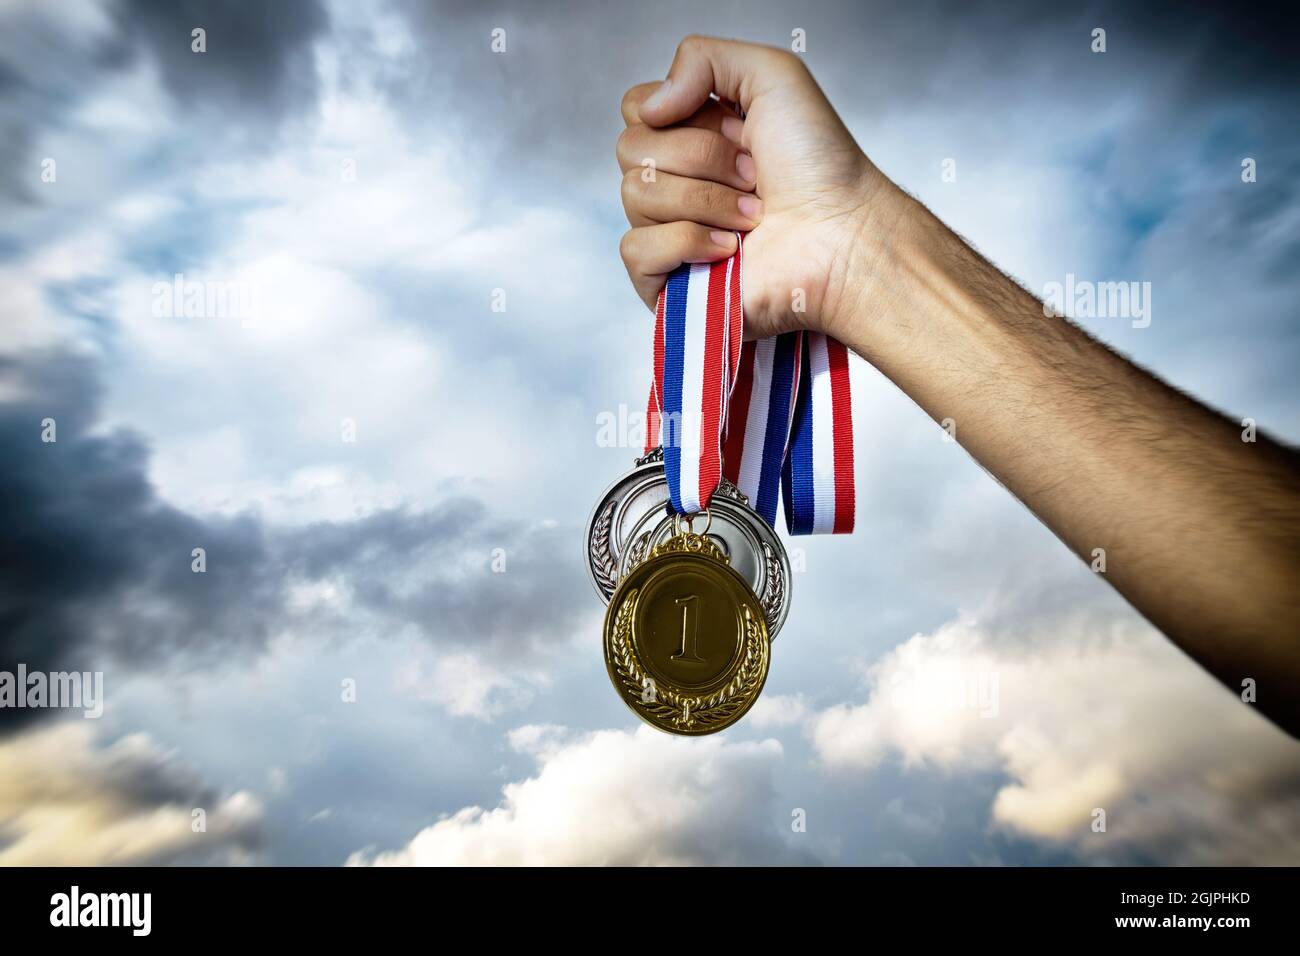 Medals in the athlete hand against a dramatic sky. Winner award, gold silver and bronze. Sport champion victory and success concept Stock Photo